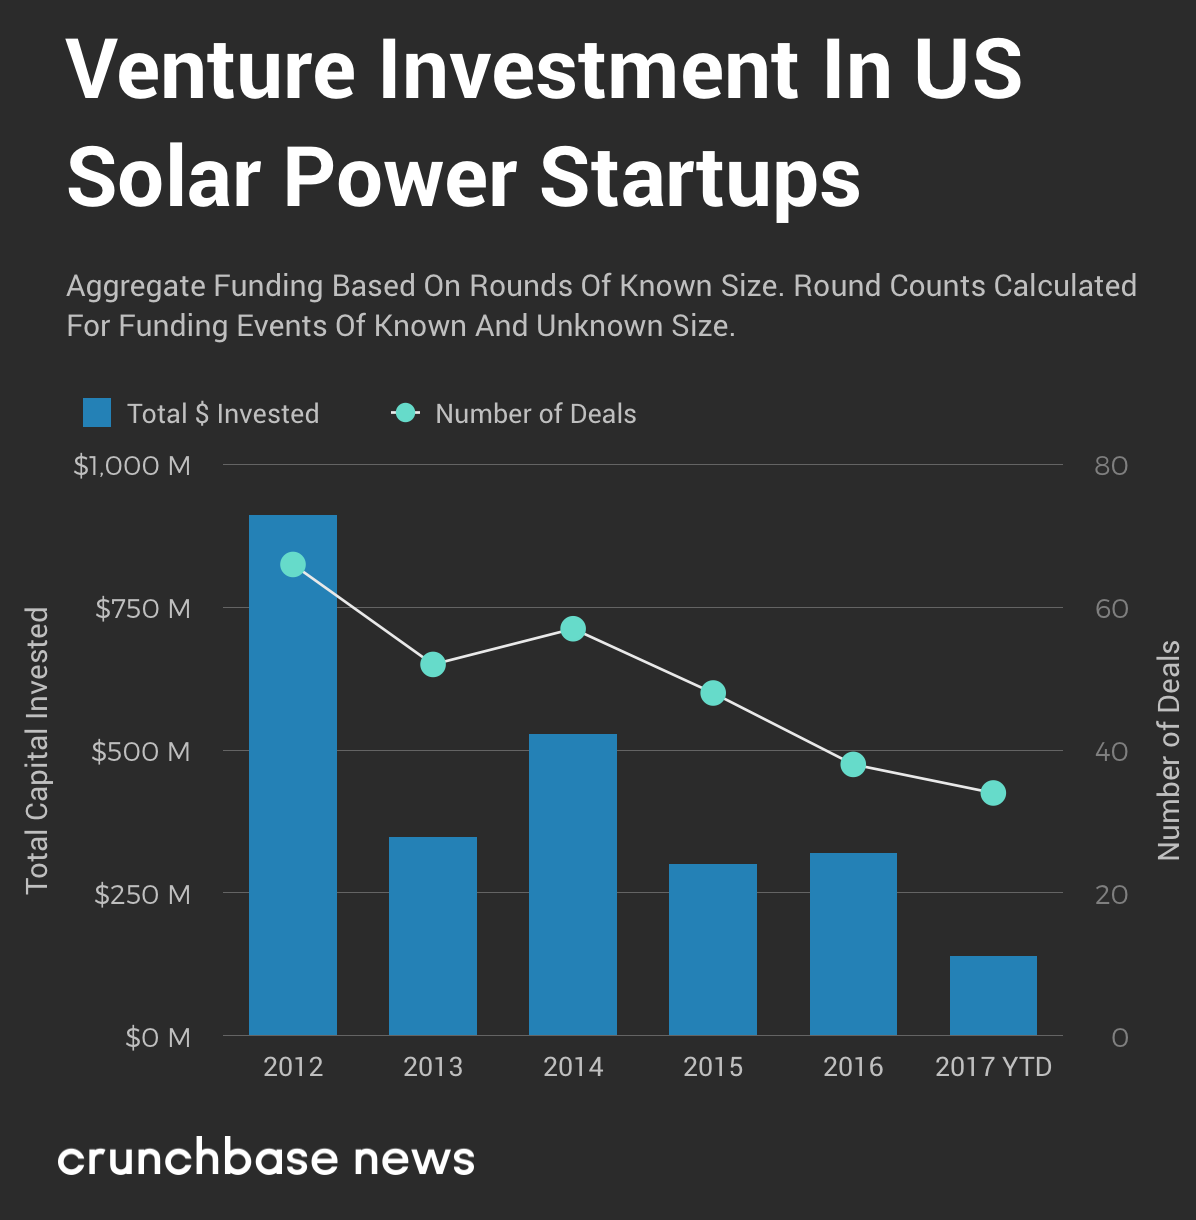 Investment in renewable energy fluctuates